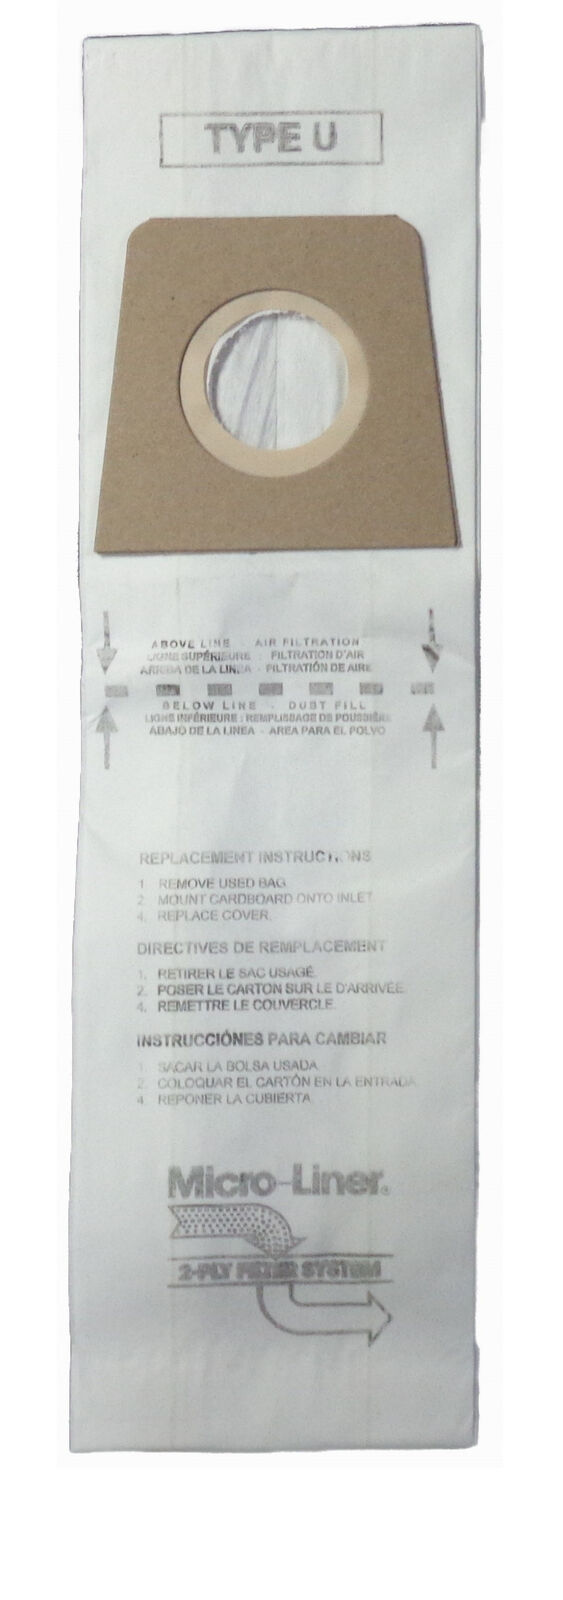 DVC [300 Bags] Royal Dirt Devil Type U Micro Allergen Vacuum Cleaner Bags by DVC Made in USA